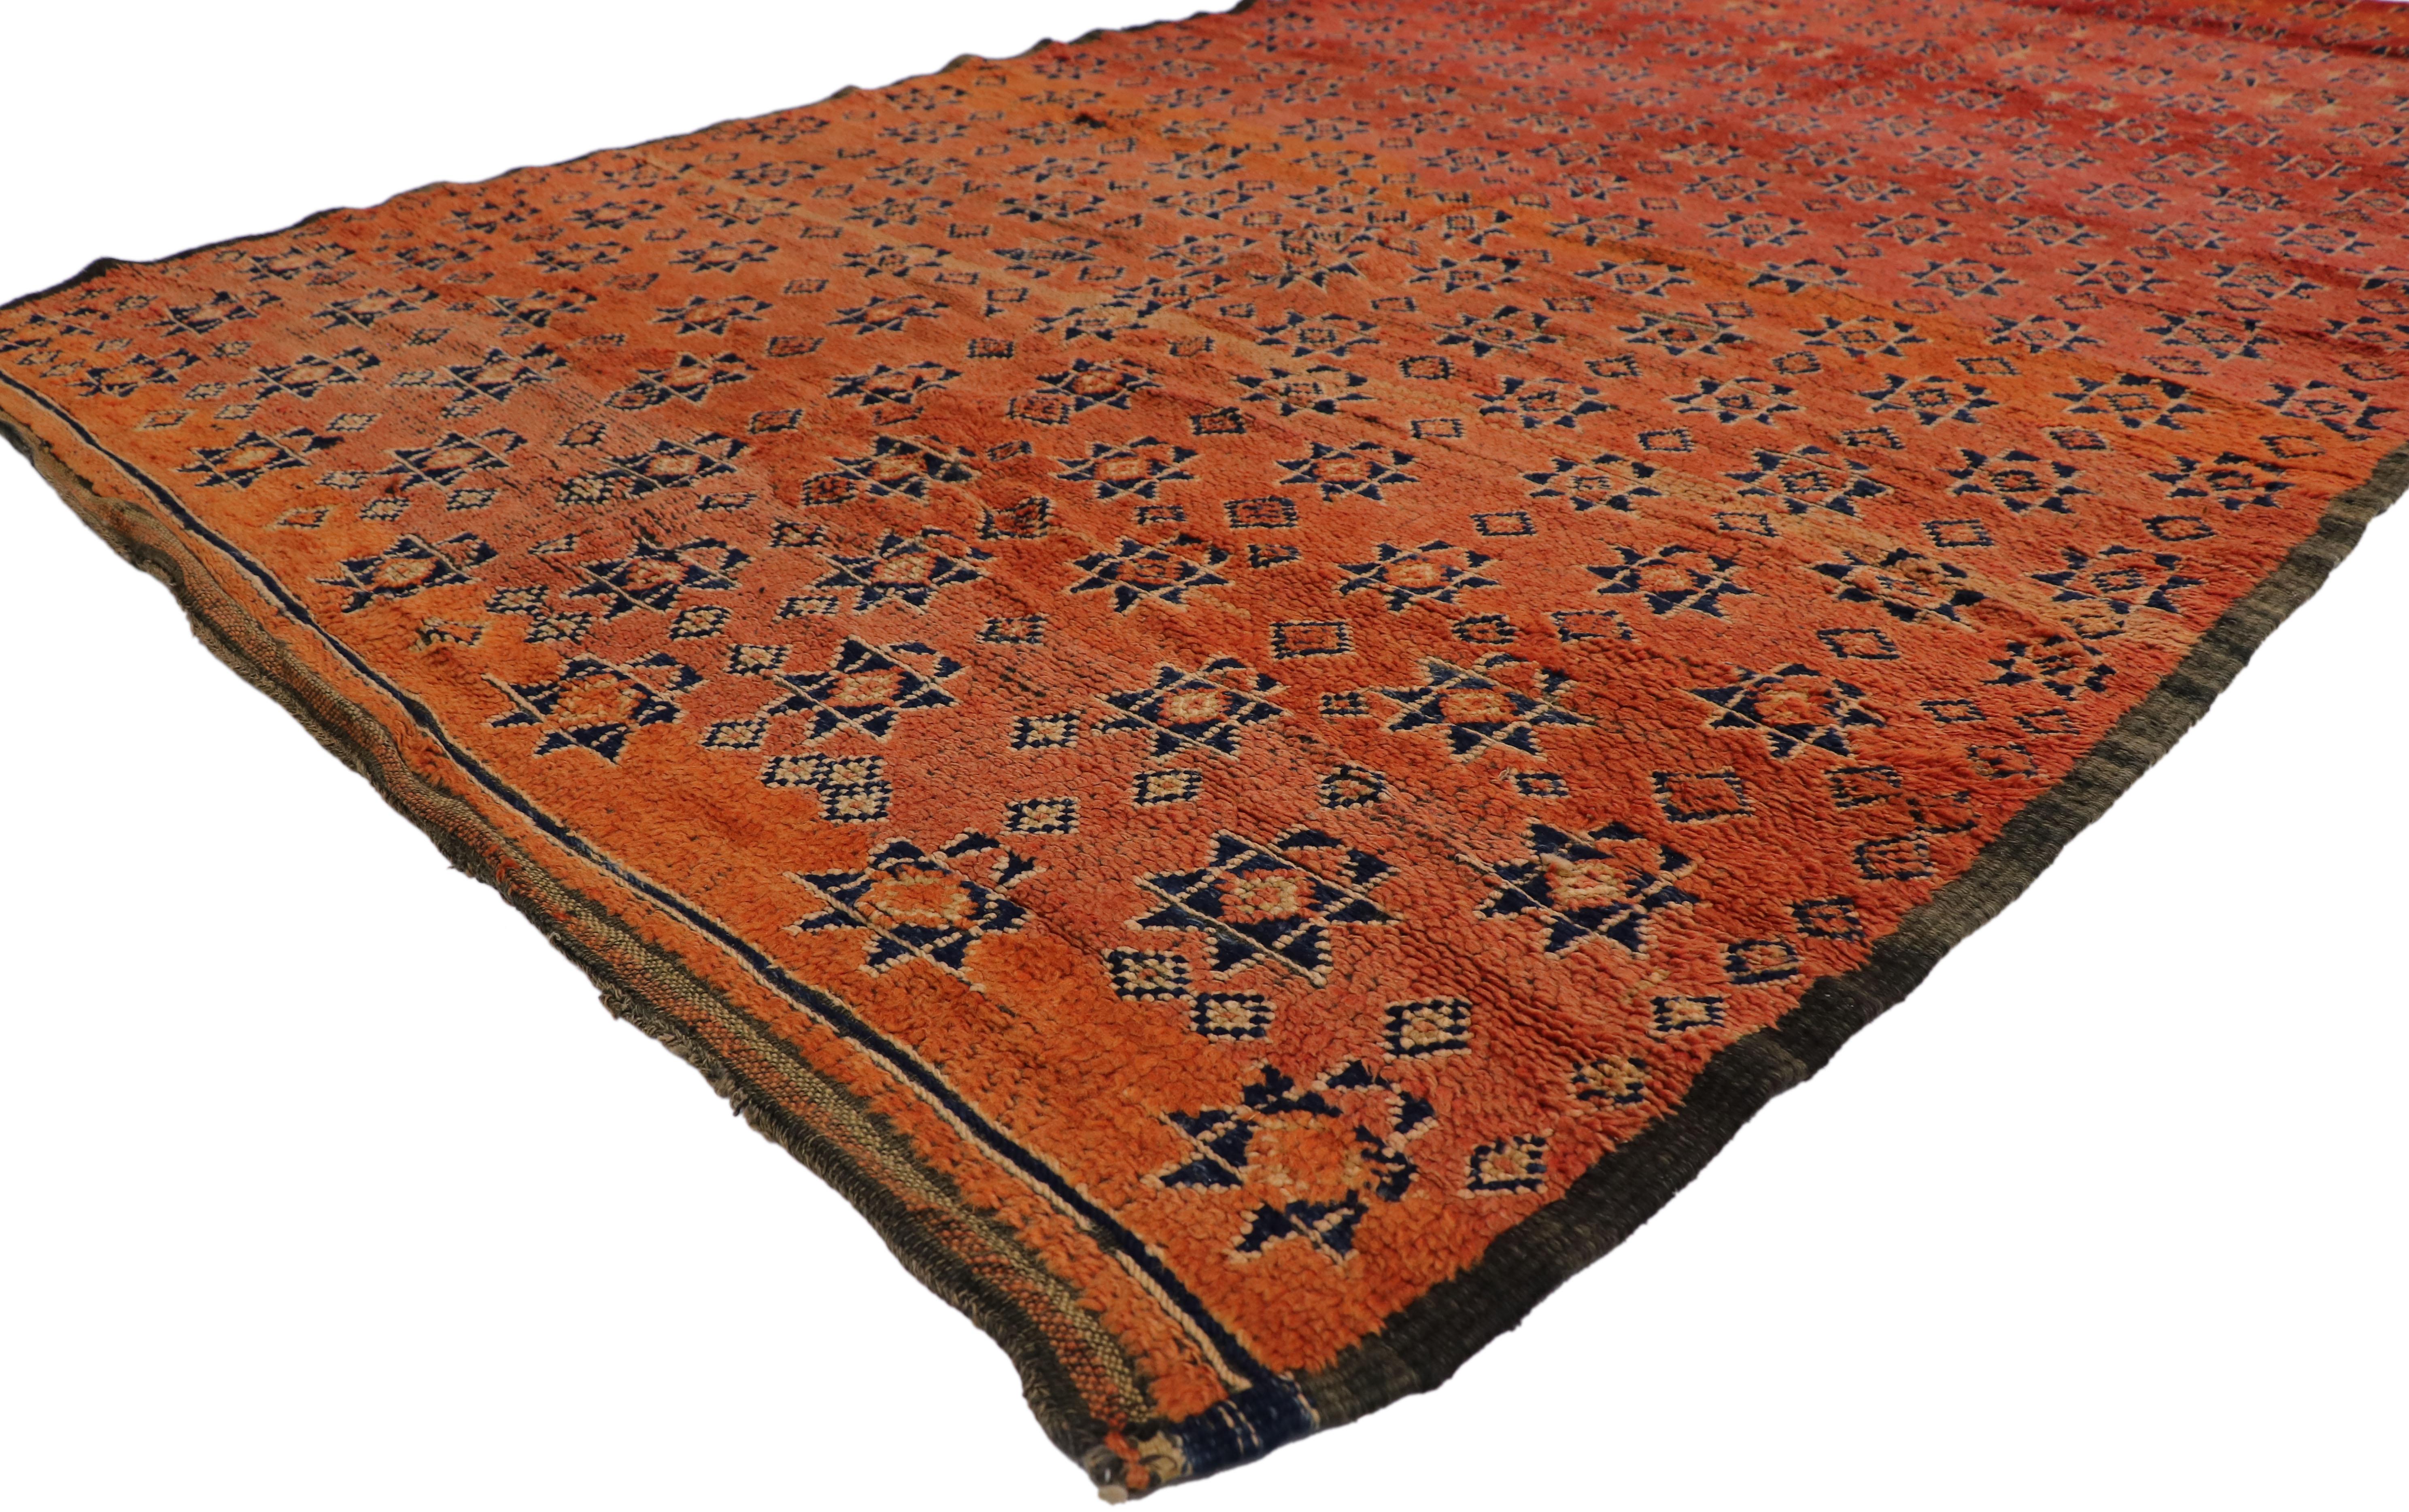 21473 Vintage Beni MGuild Moroccan Rug, 05'09 x 09'08. Originating from the Beni M'Guild tribe nestled in Morocco's Middle Atlas Mountains, Beni M'Guild rugs embody a cherished tradition meticulously handcrafted by skilled Berber women. These rugs